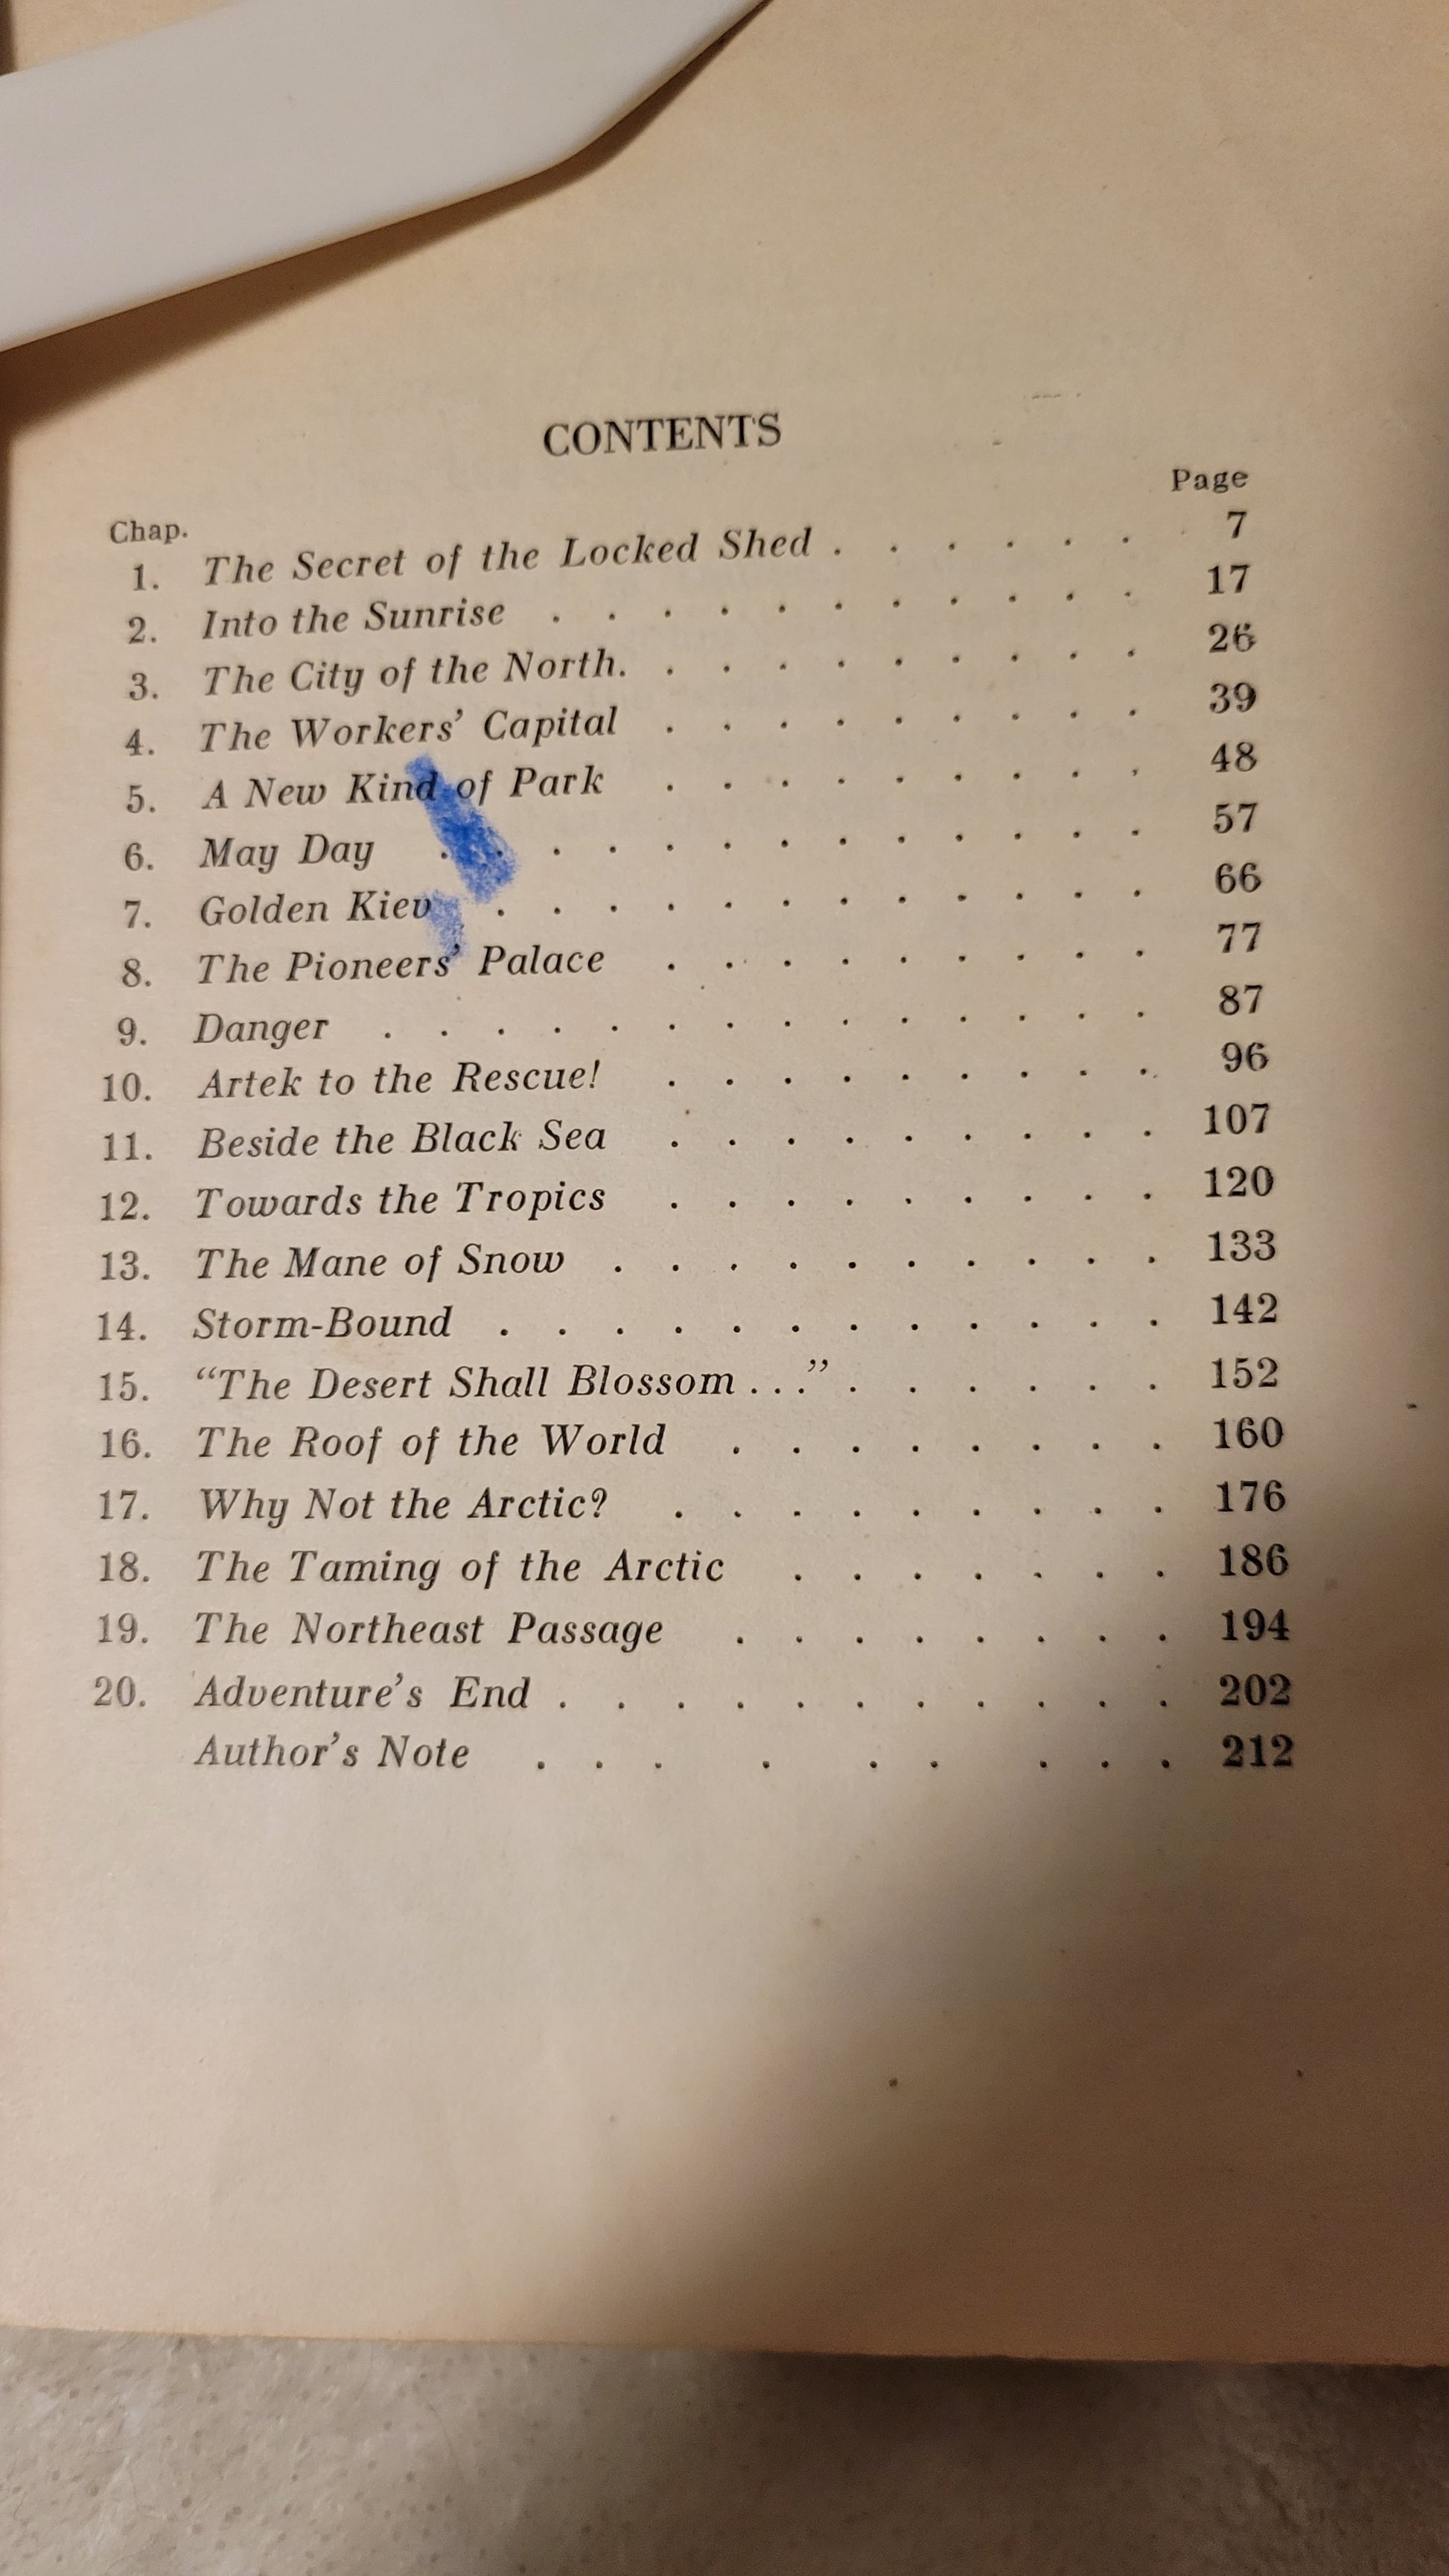 Vintage book for sale from the USSR, “Red Comet: A Tale of Travel in the USSR" written by British author Geoffrey Trease, published by International Publishers, 1937. View of table of contents